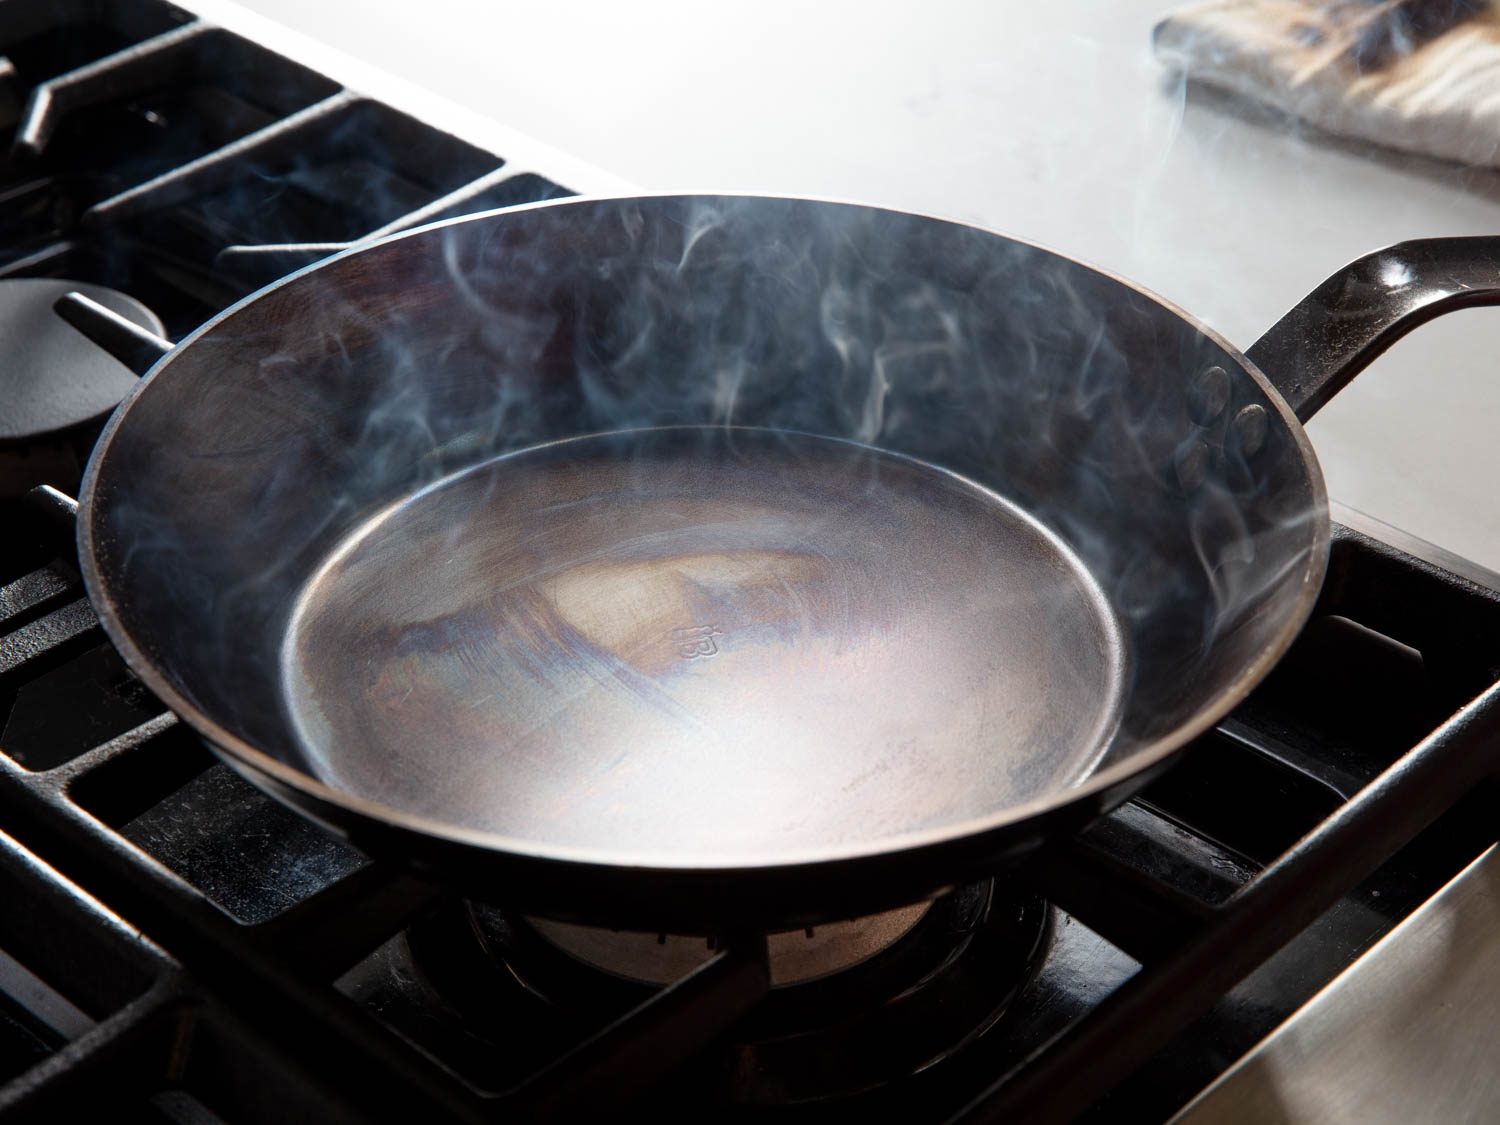 A carbon steel pan in the early stages of seasoning